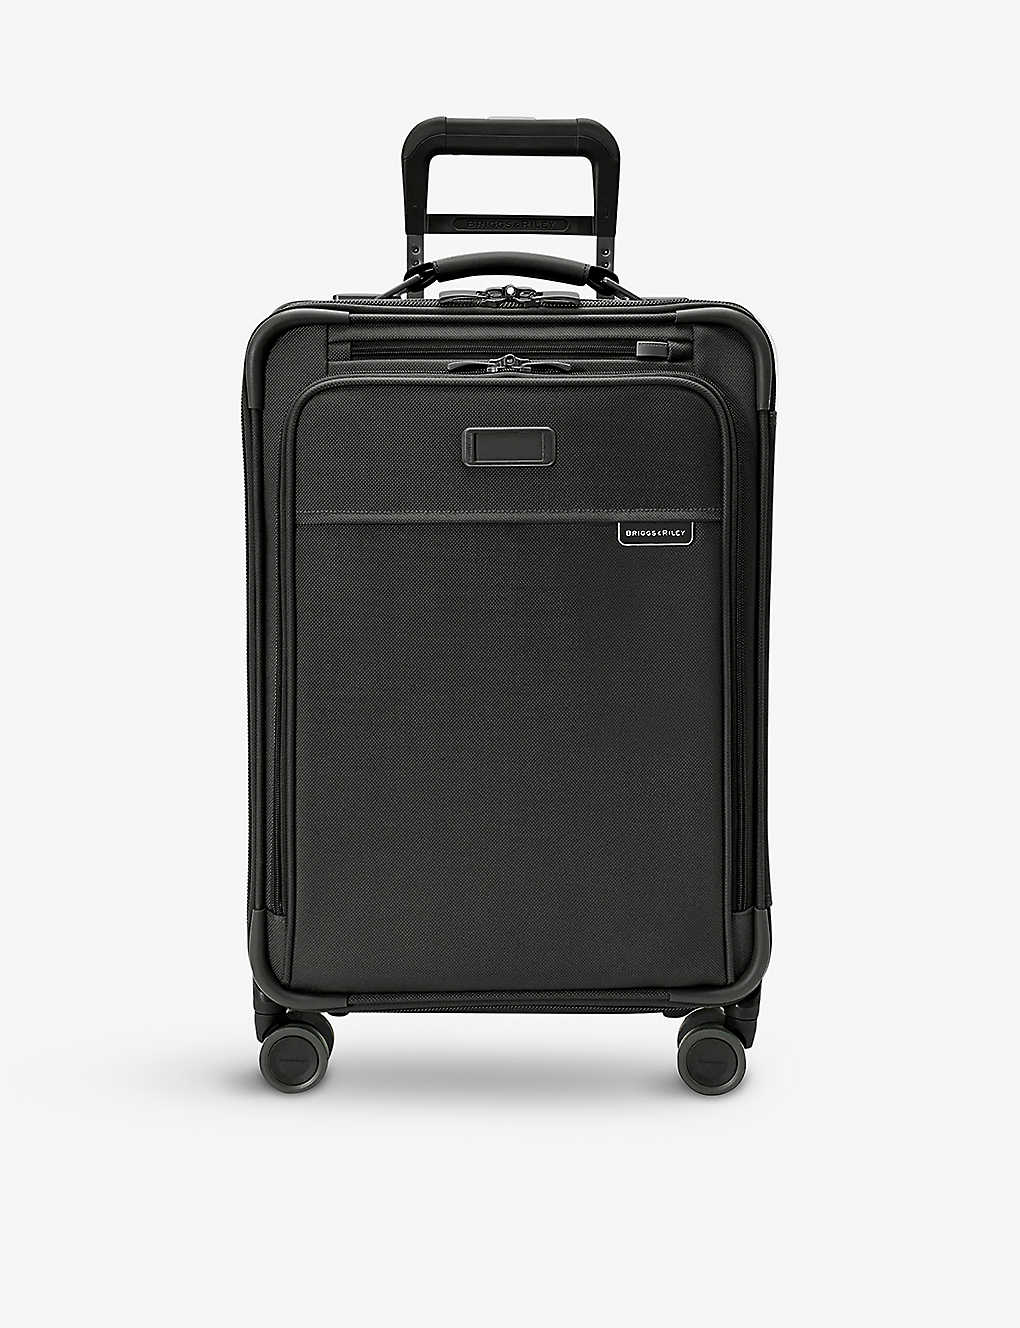 Briggs & Riley Essential Carry-on Spinner Shell Suitcase 55.9 Cm In Black